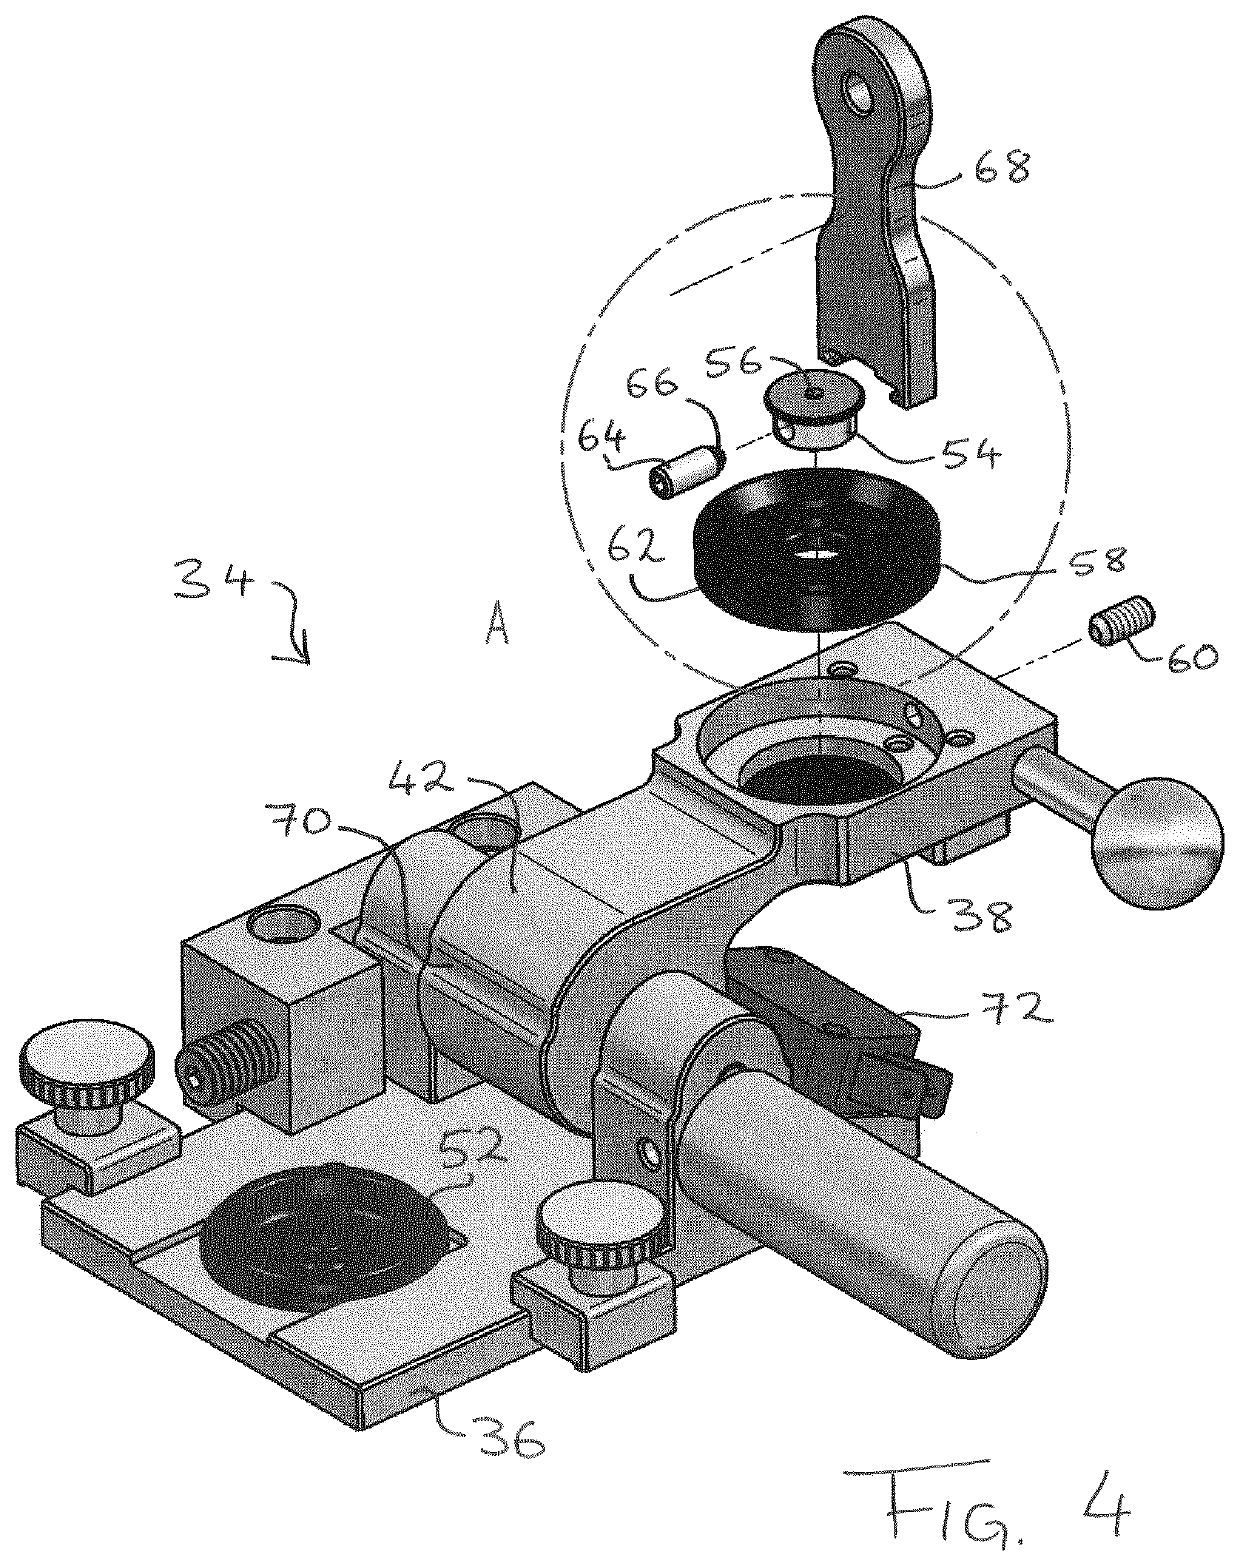 Apparatus for analyzing the optical properties of a sample